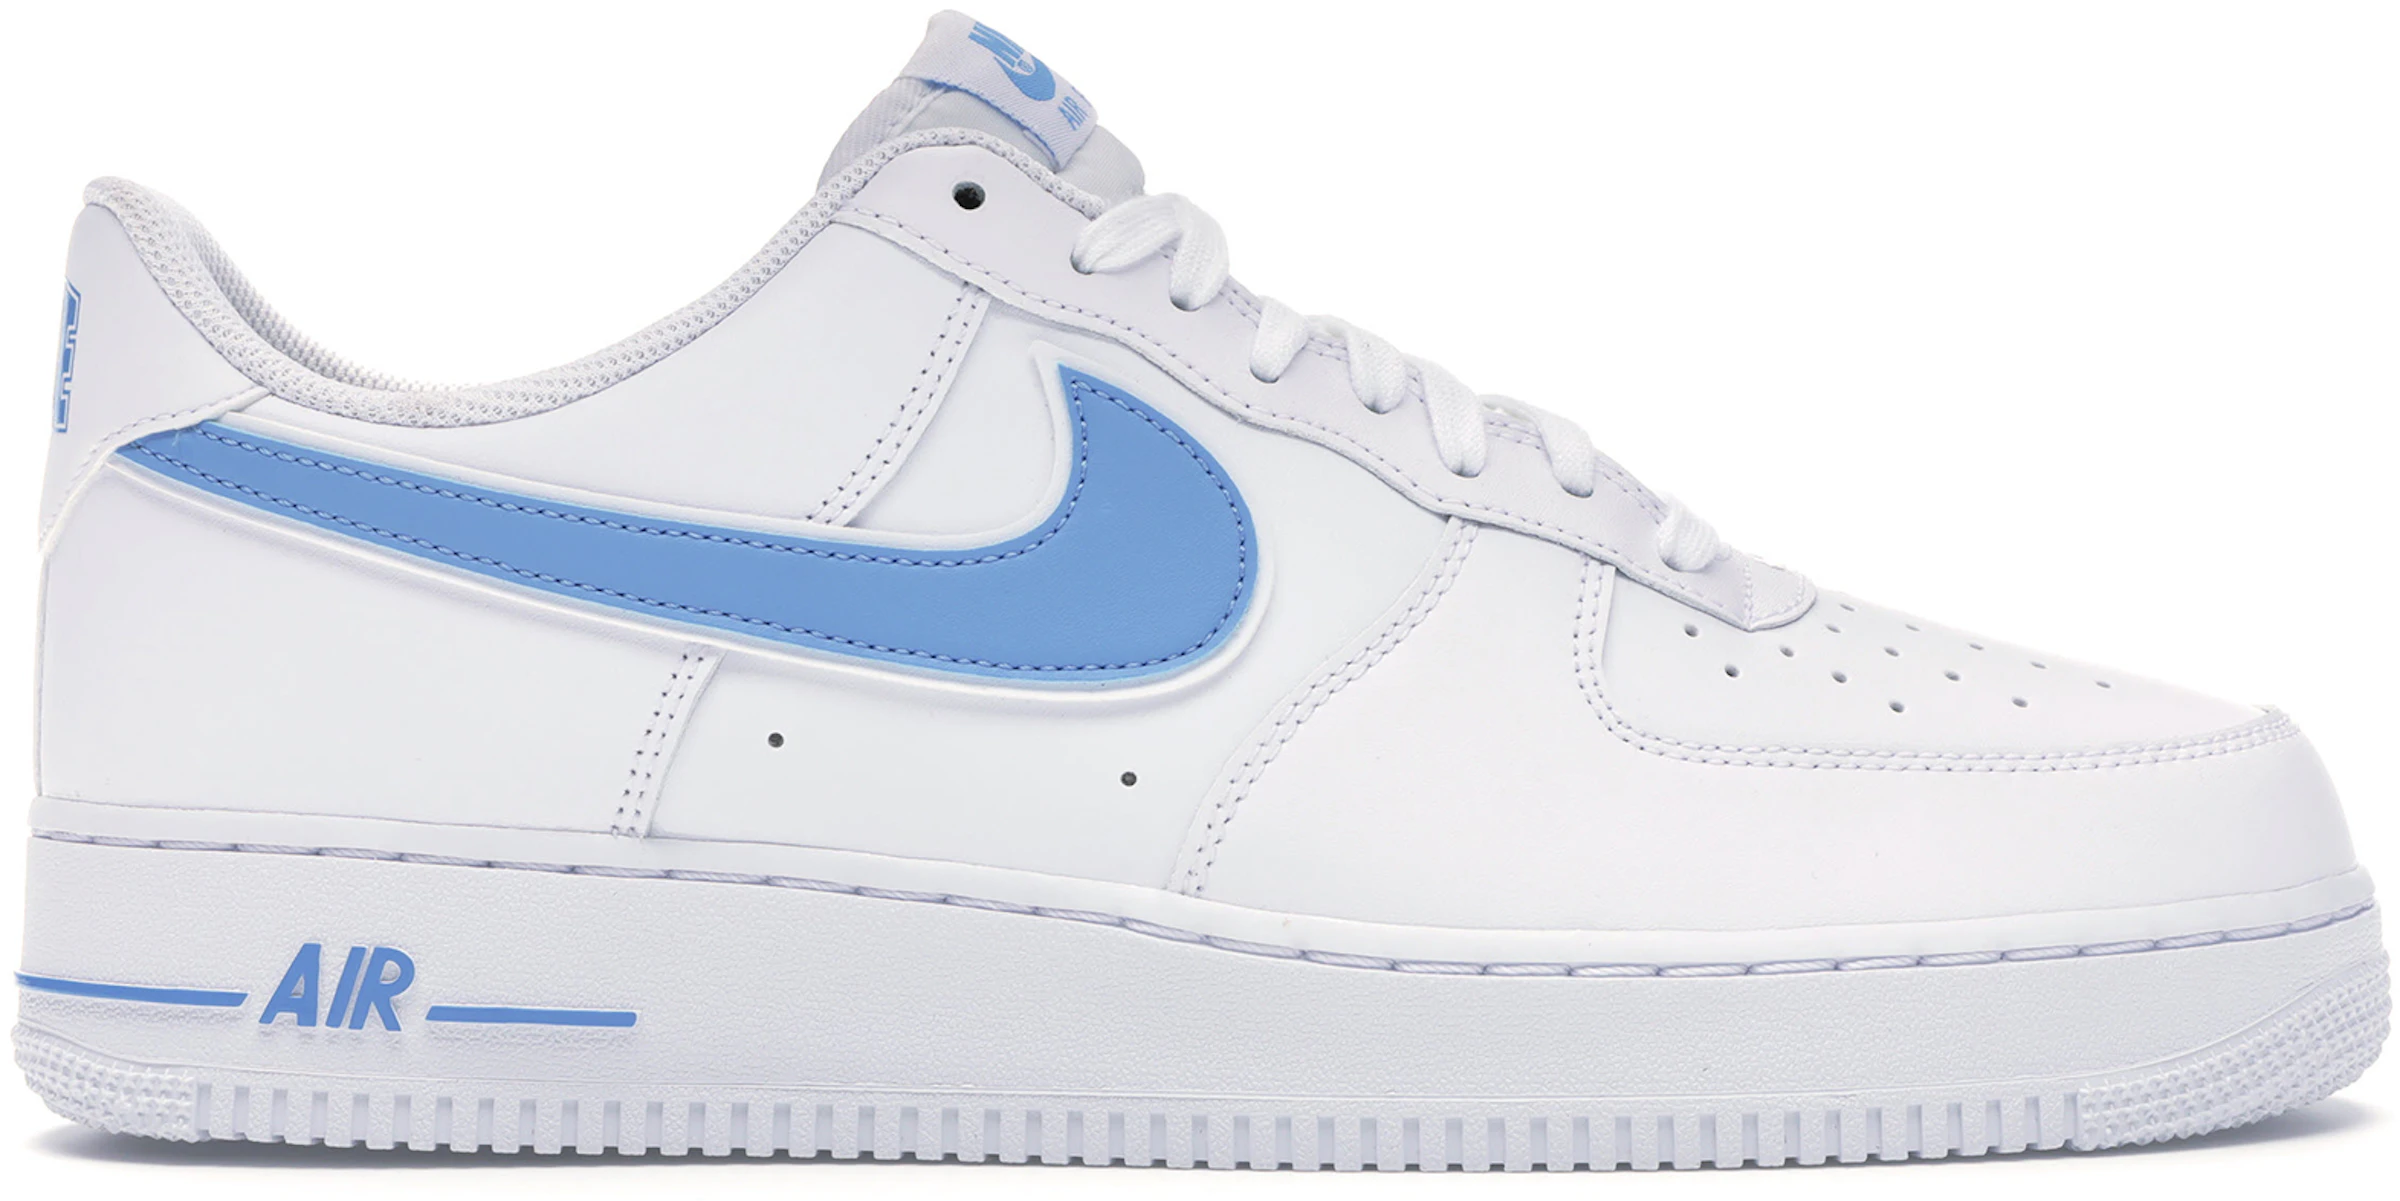 Frons rotatie Beweren Nike Air Force 1 Low White University Blue - AO2423-100 - US